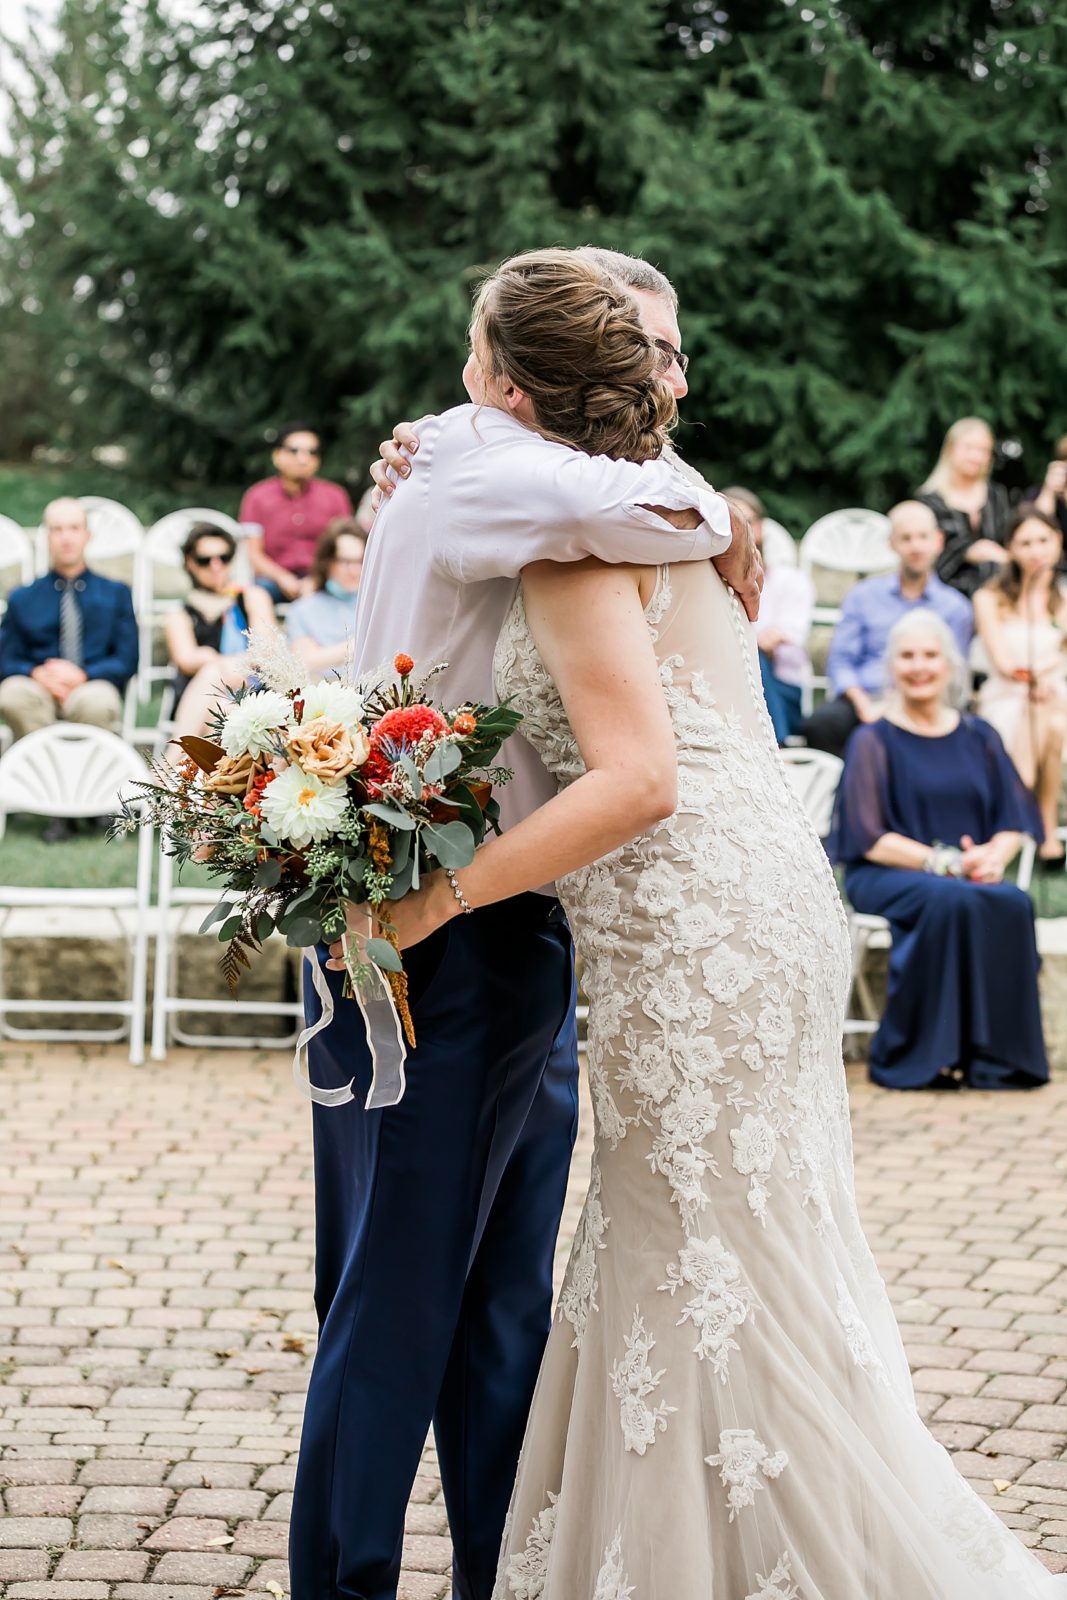 bride hugging father after he walks her down aisle